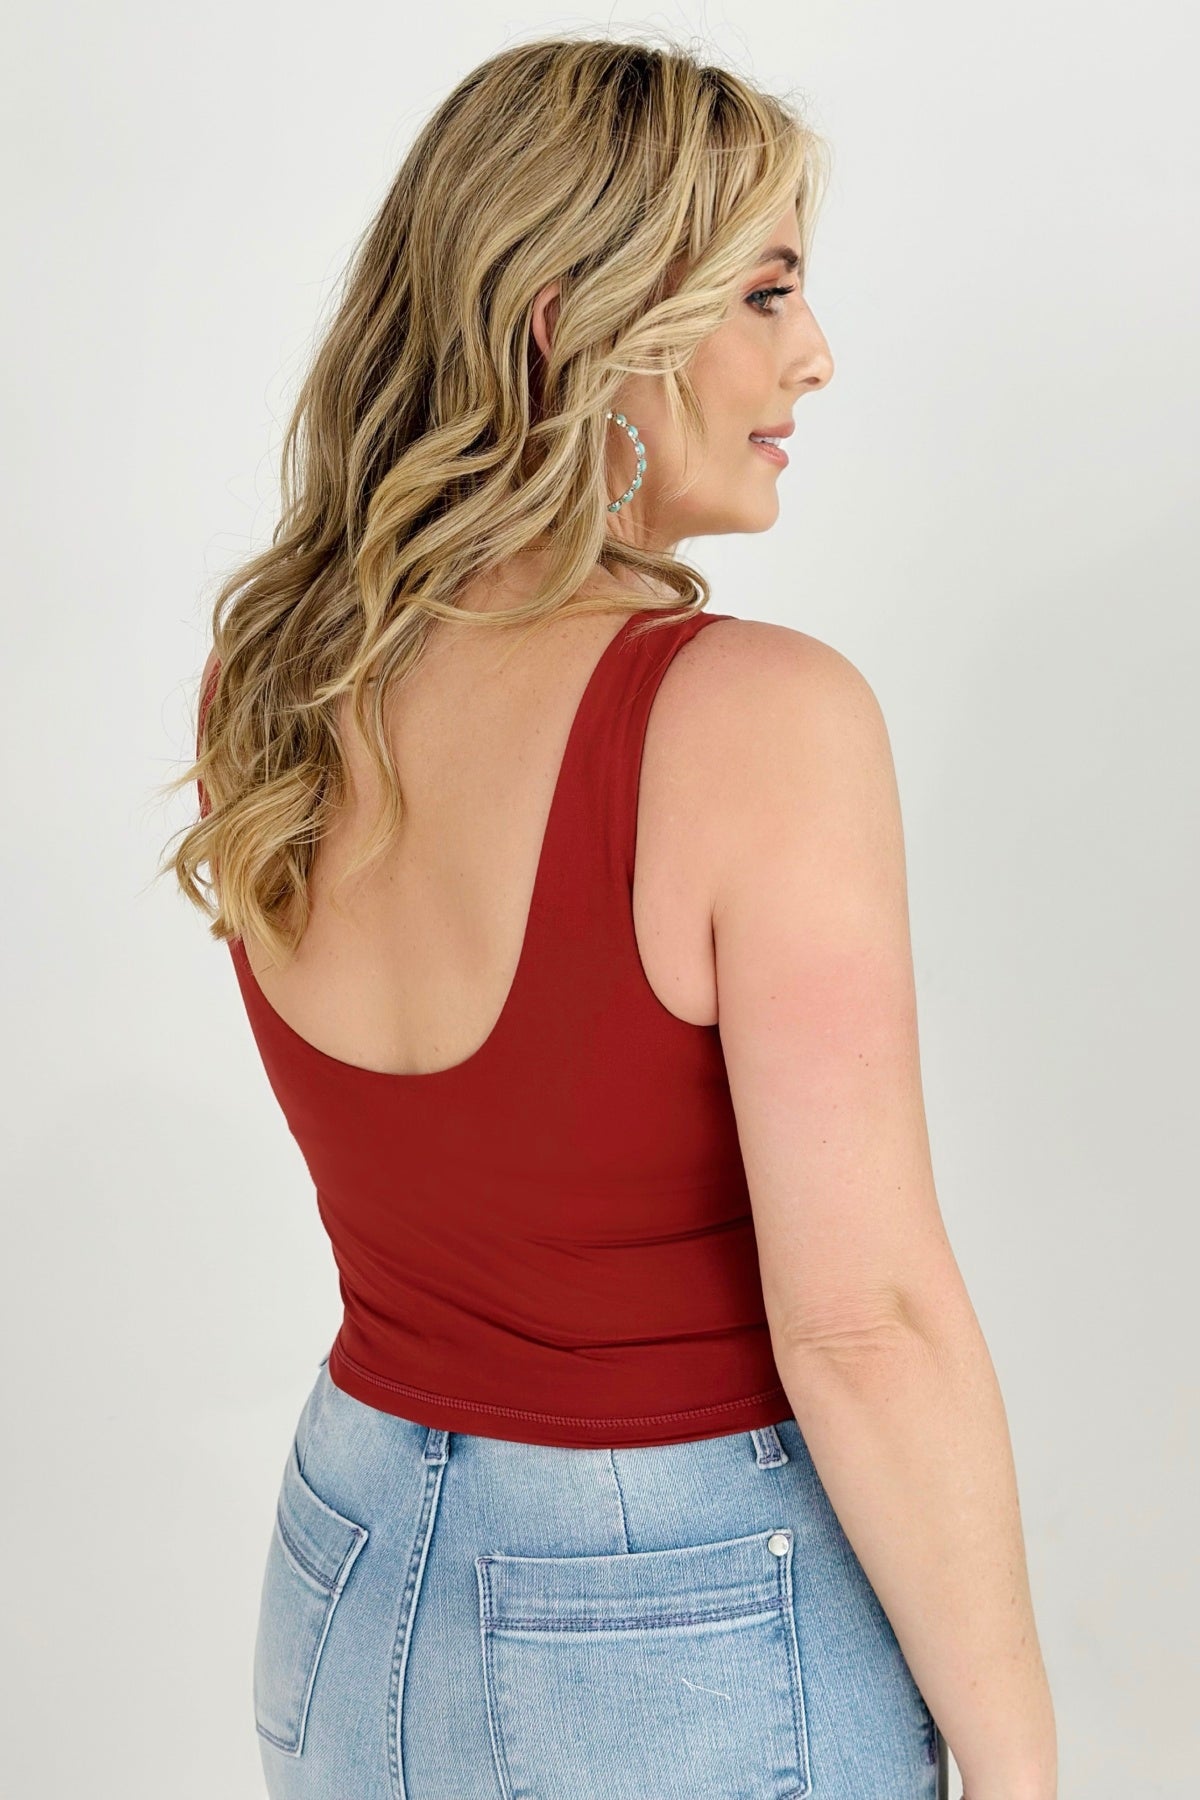 FawnFit Short Lift Tank with Built-in Bra